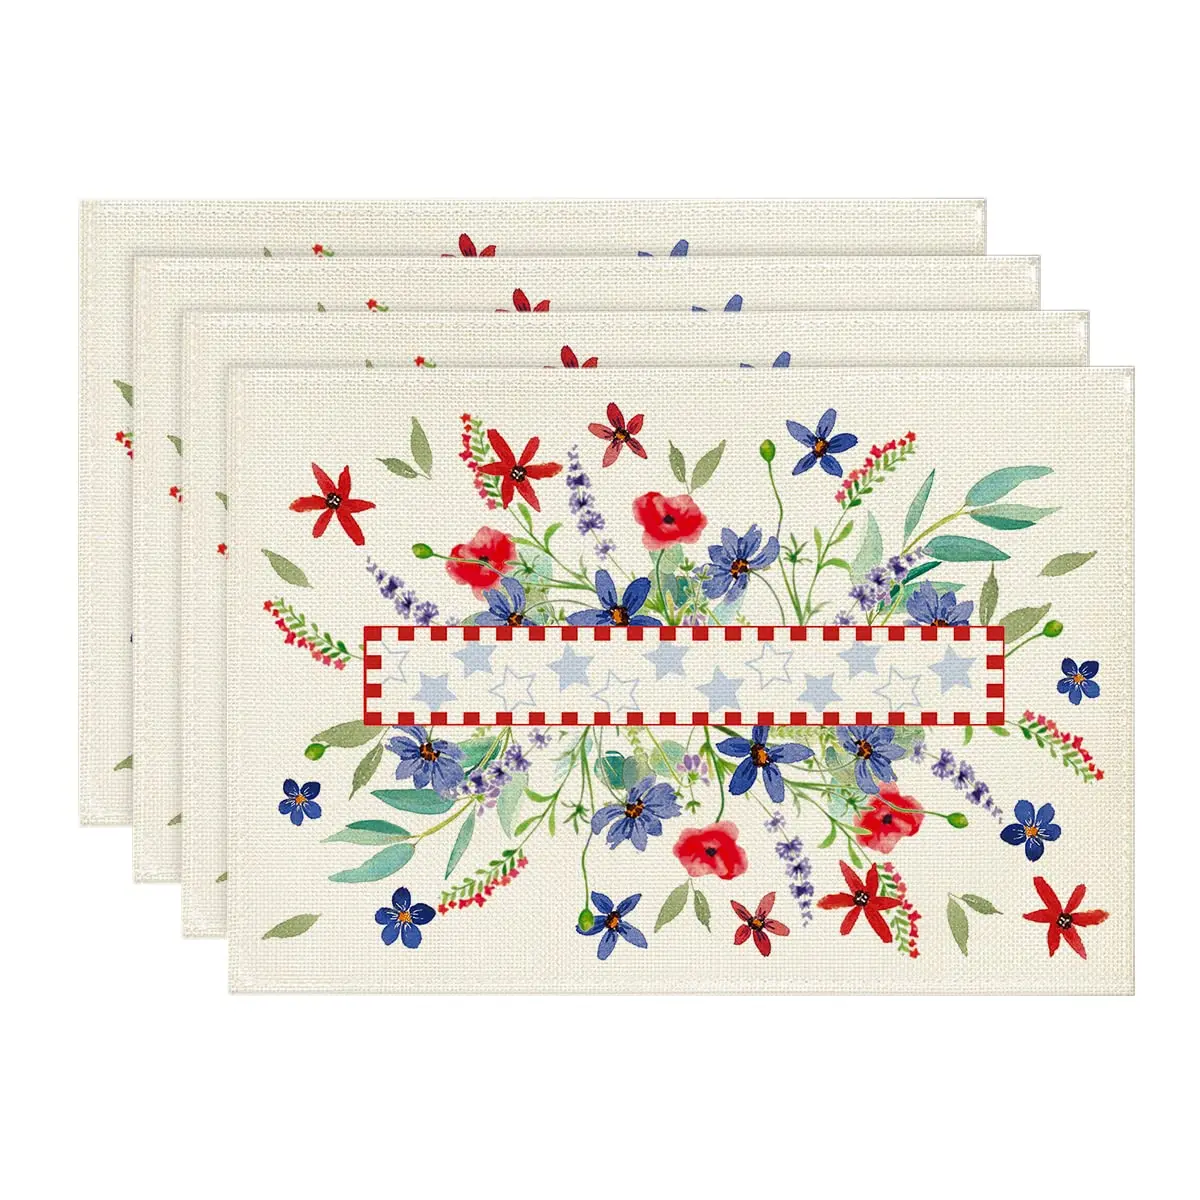 

Poppy Floral Eucalyptus Leaves 4th of July Placemats Set of 4, 12x18 Inch Patriotic Holiday Table Mats for Kitchen Dining Decor